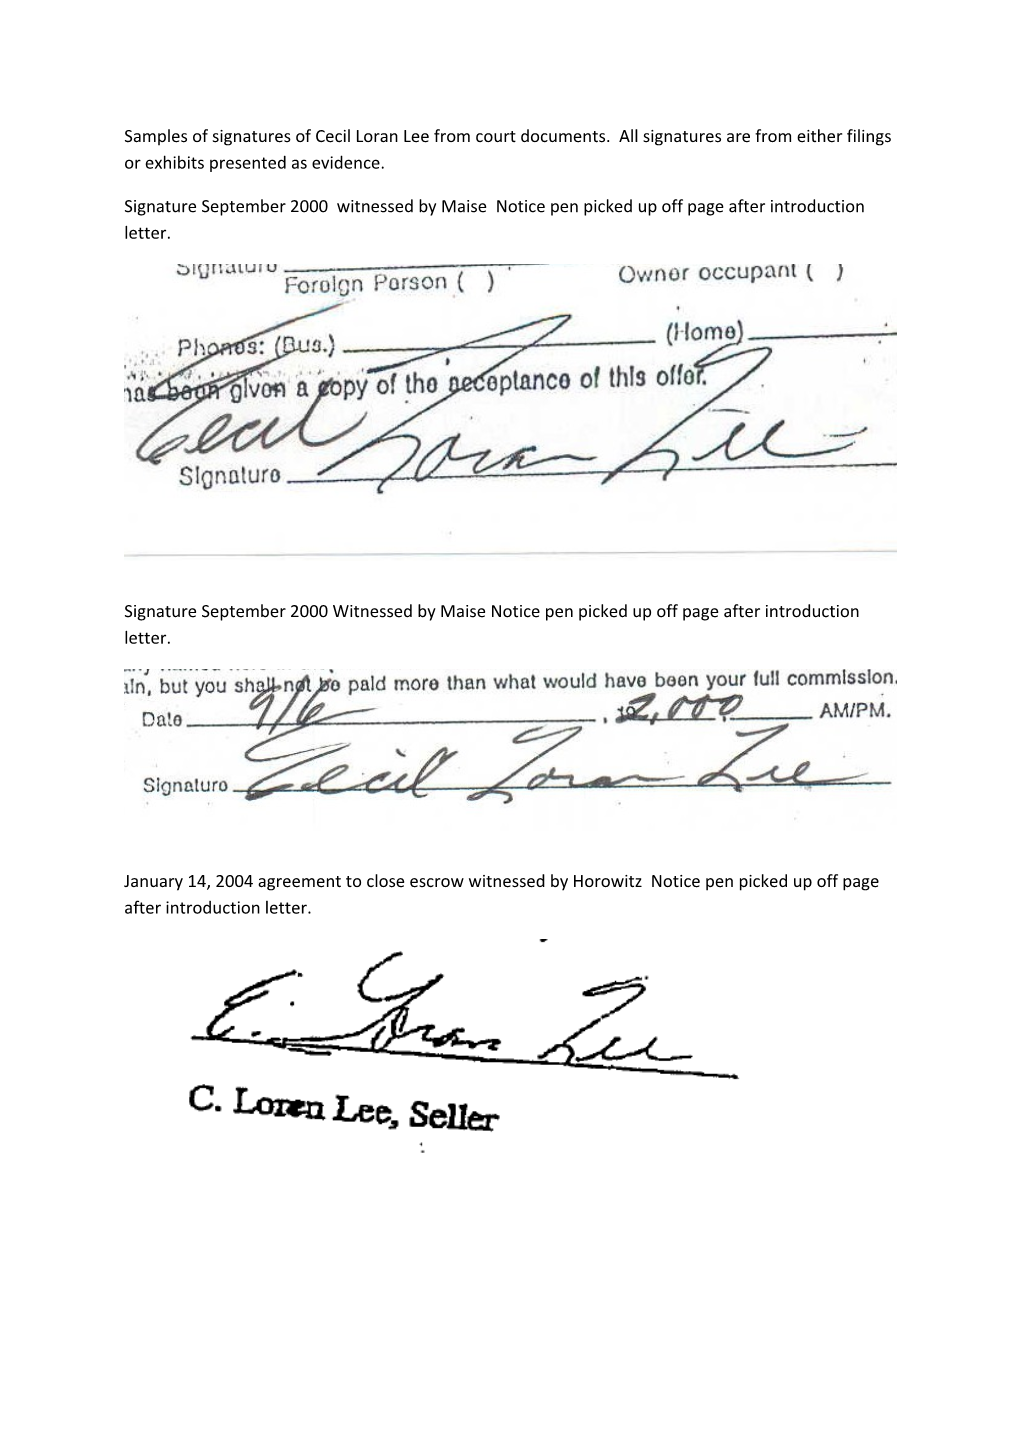 Samples of Signatures of Cecil Loran Lee from Court Documents. All Signatures Are From